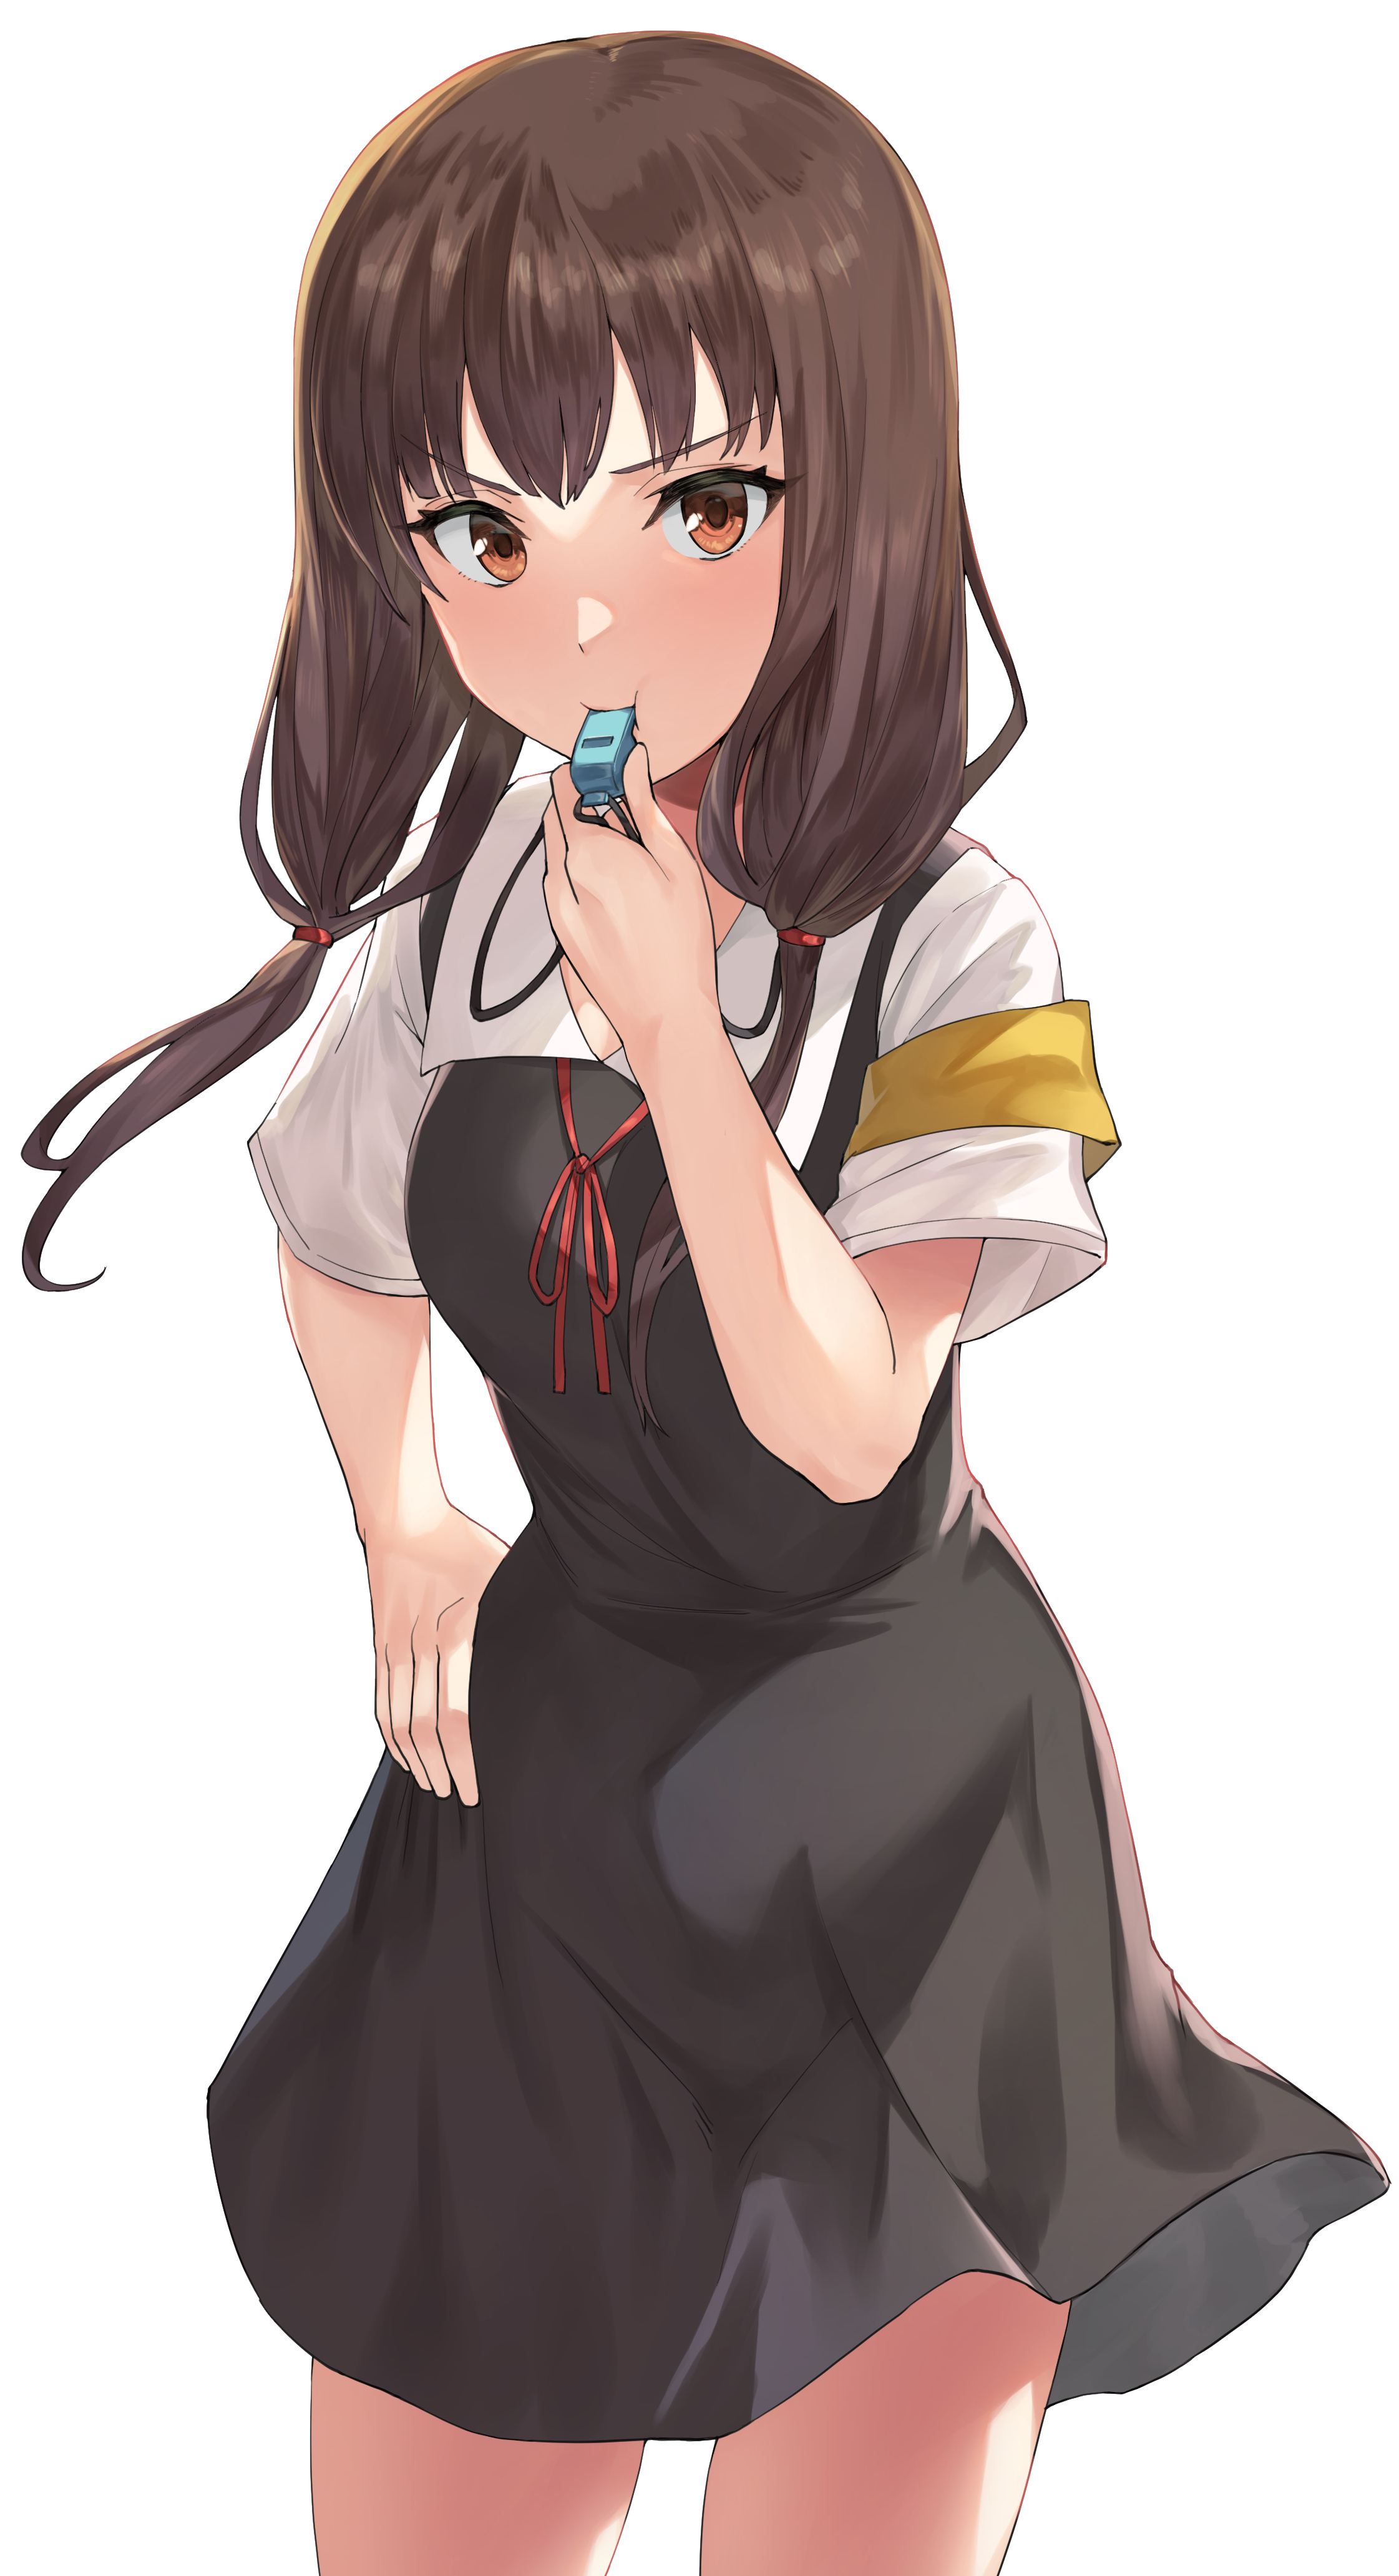 Anime 2242x4129 Kaguya-Sama: Love is War anime girls thighs school uniform JK long hair black dress small boobs brunette 2D Miko Iino blushing simple background portrait display looking at viewer curvy arched back brown eyes whistle anime twintails